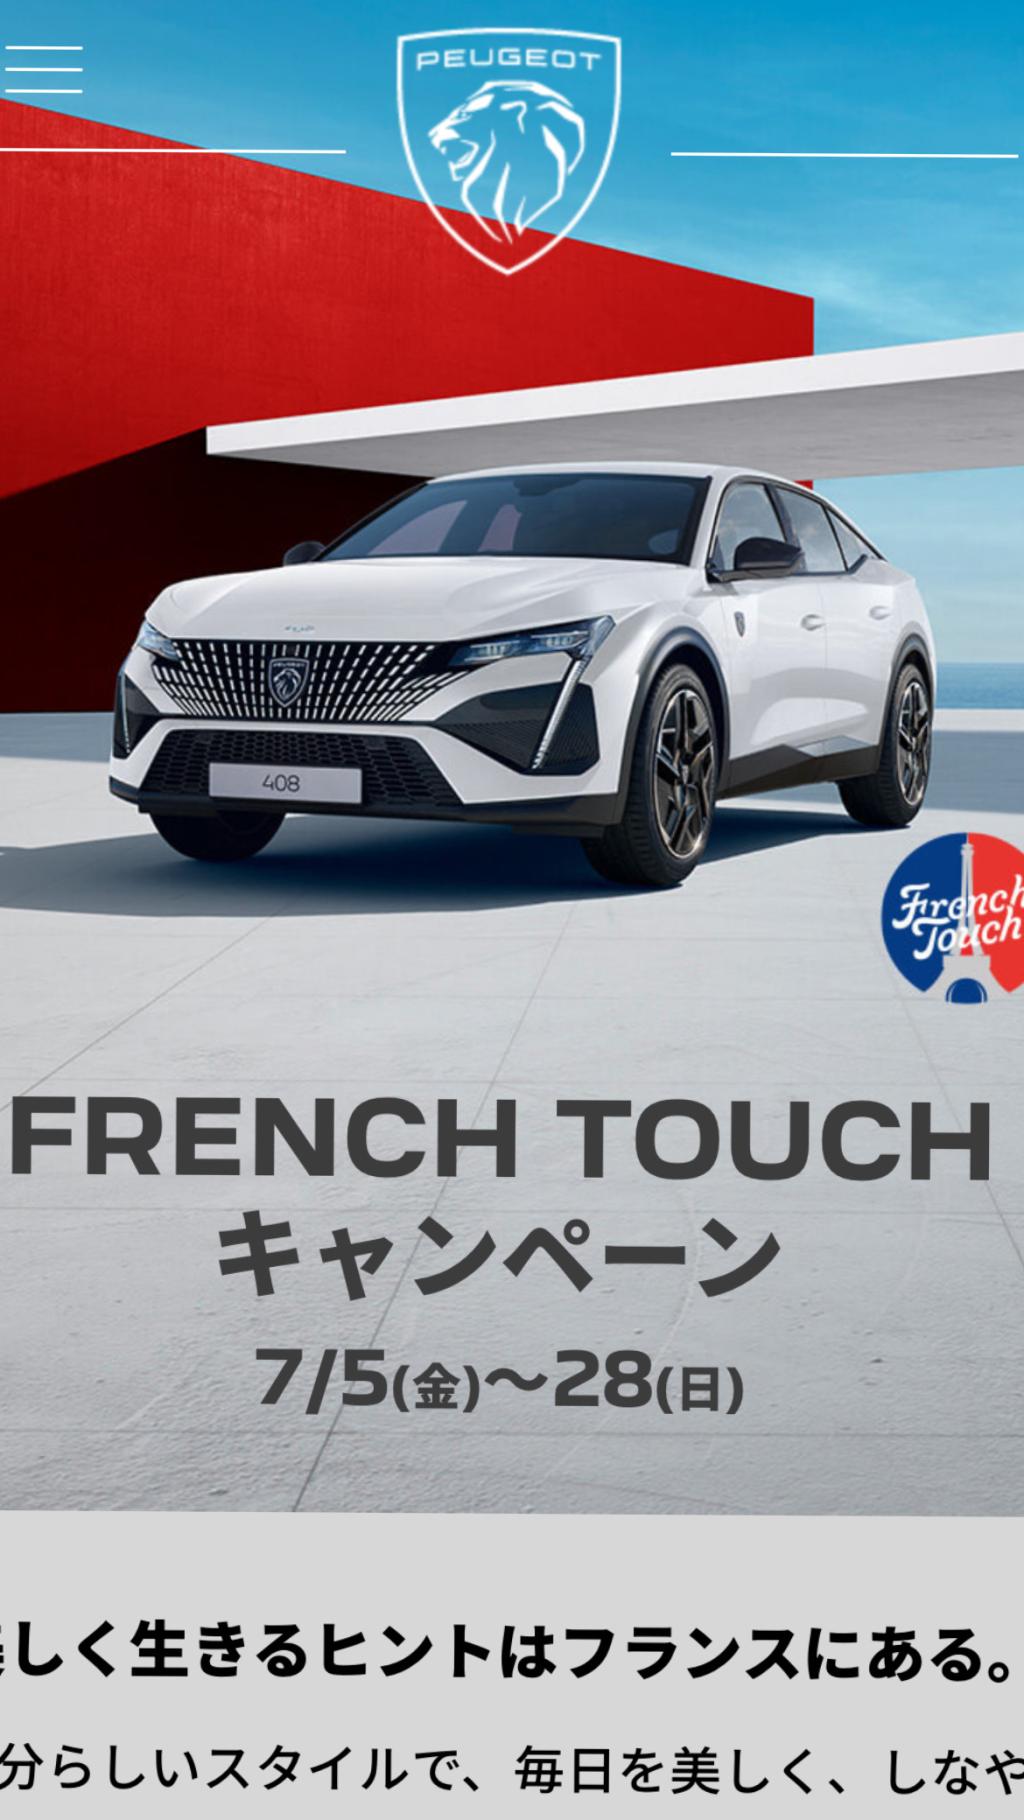 408FrenchTouchキャンペーン実施中！！